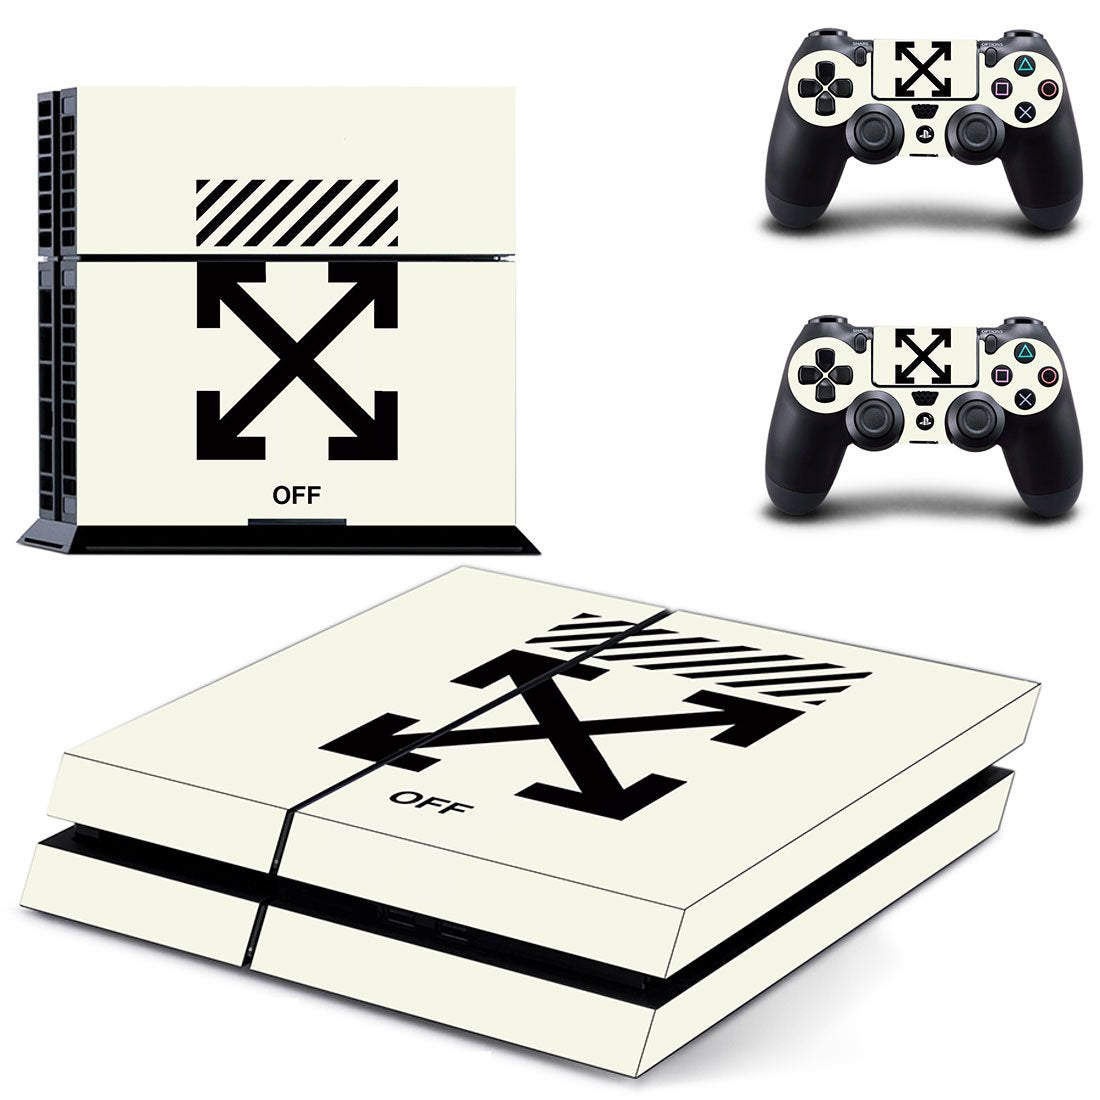 off white ps4 controller